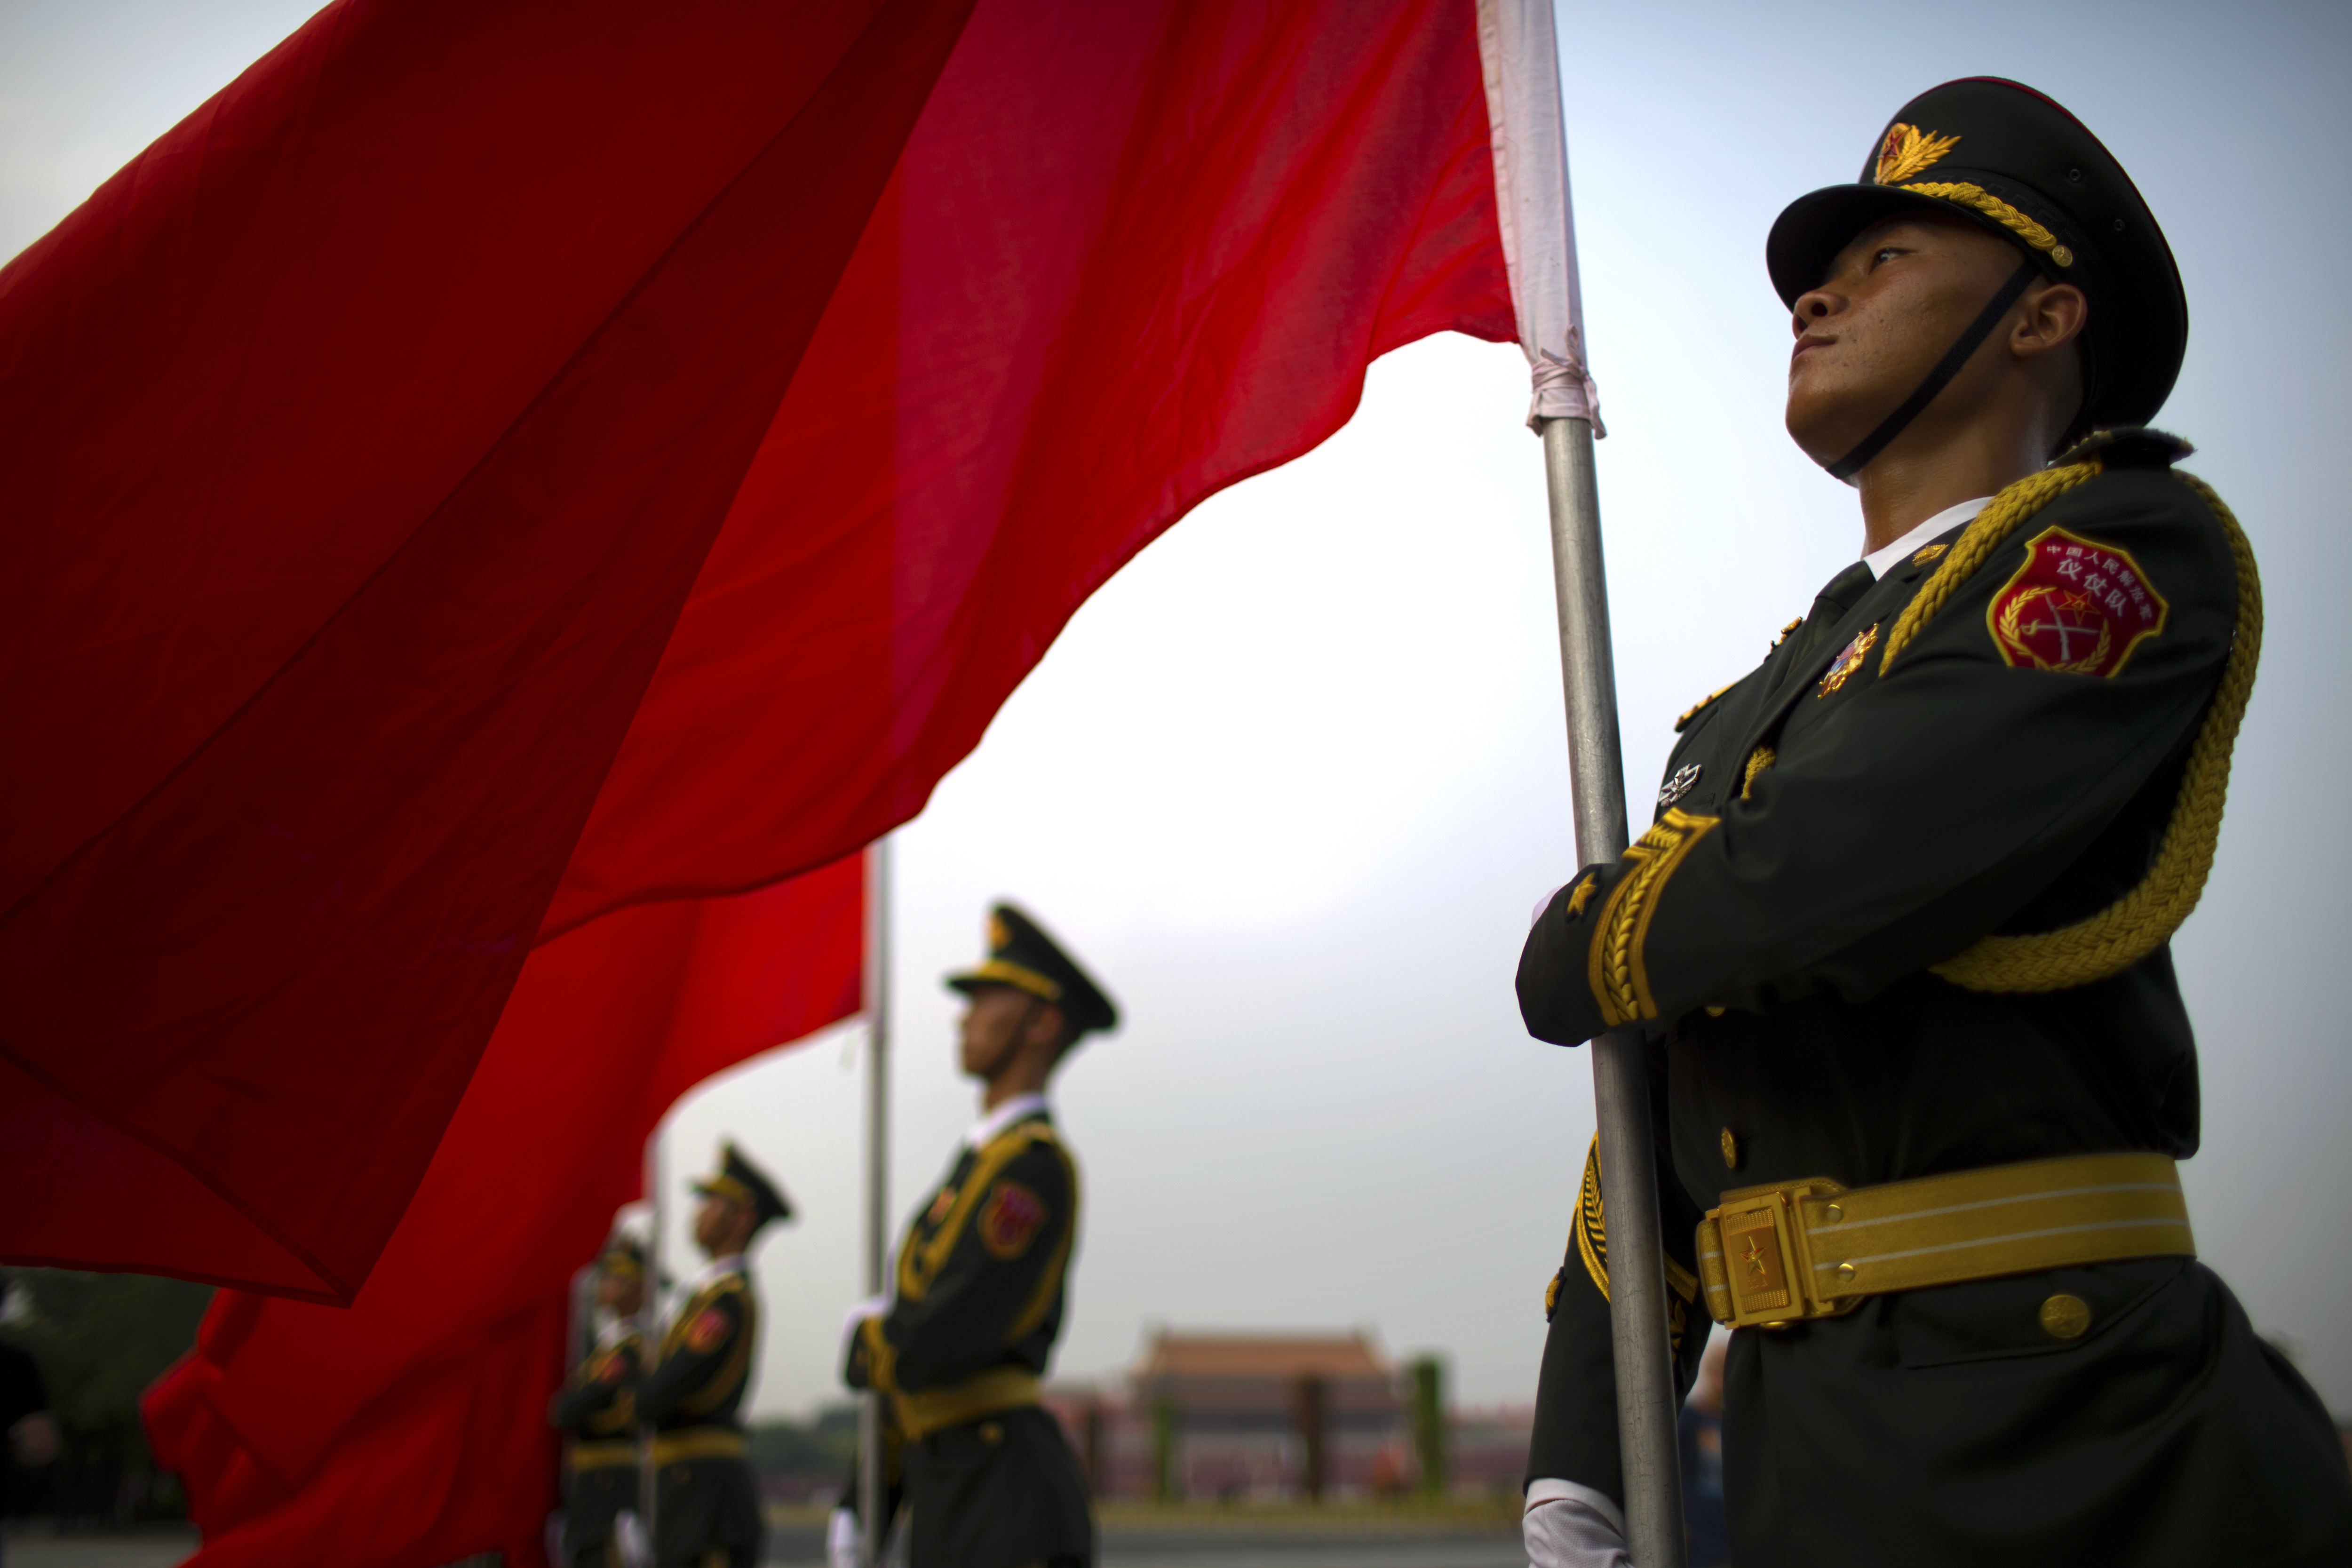 Members of a Chinese honor guard stand in formation before a welcome ceremony for Palestinian President Mahmoud Abbas at the Great Hall of the People in Beijing, Tuesday, July 18, 2017. (AP Photo/Mark Schiefelbein)